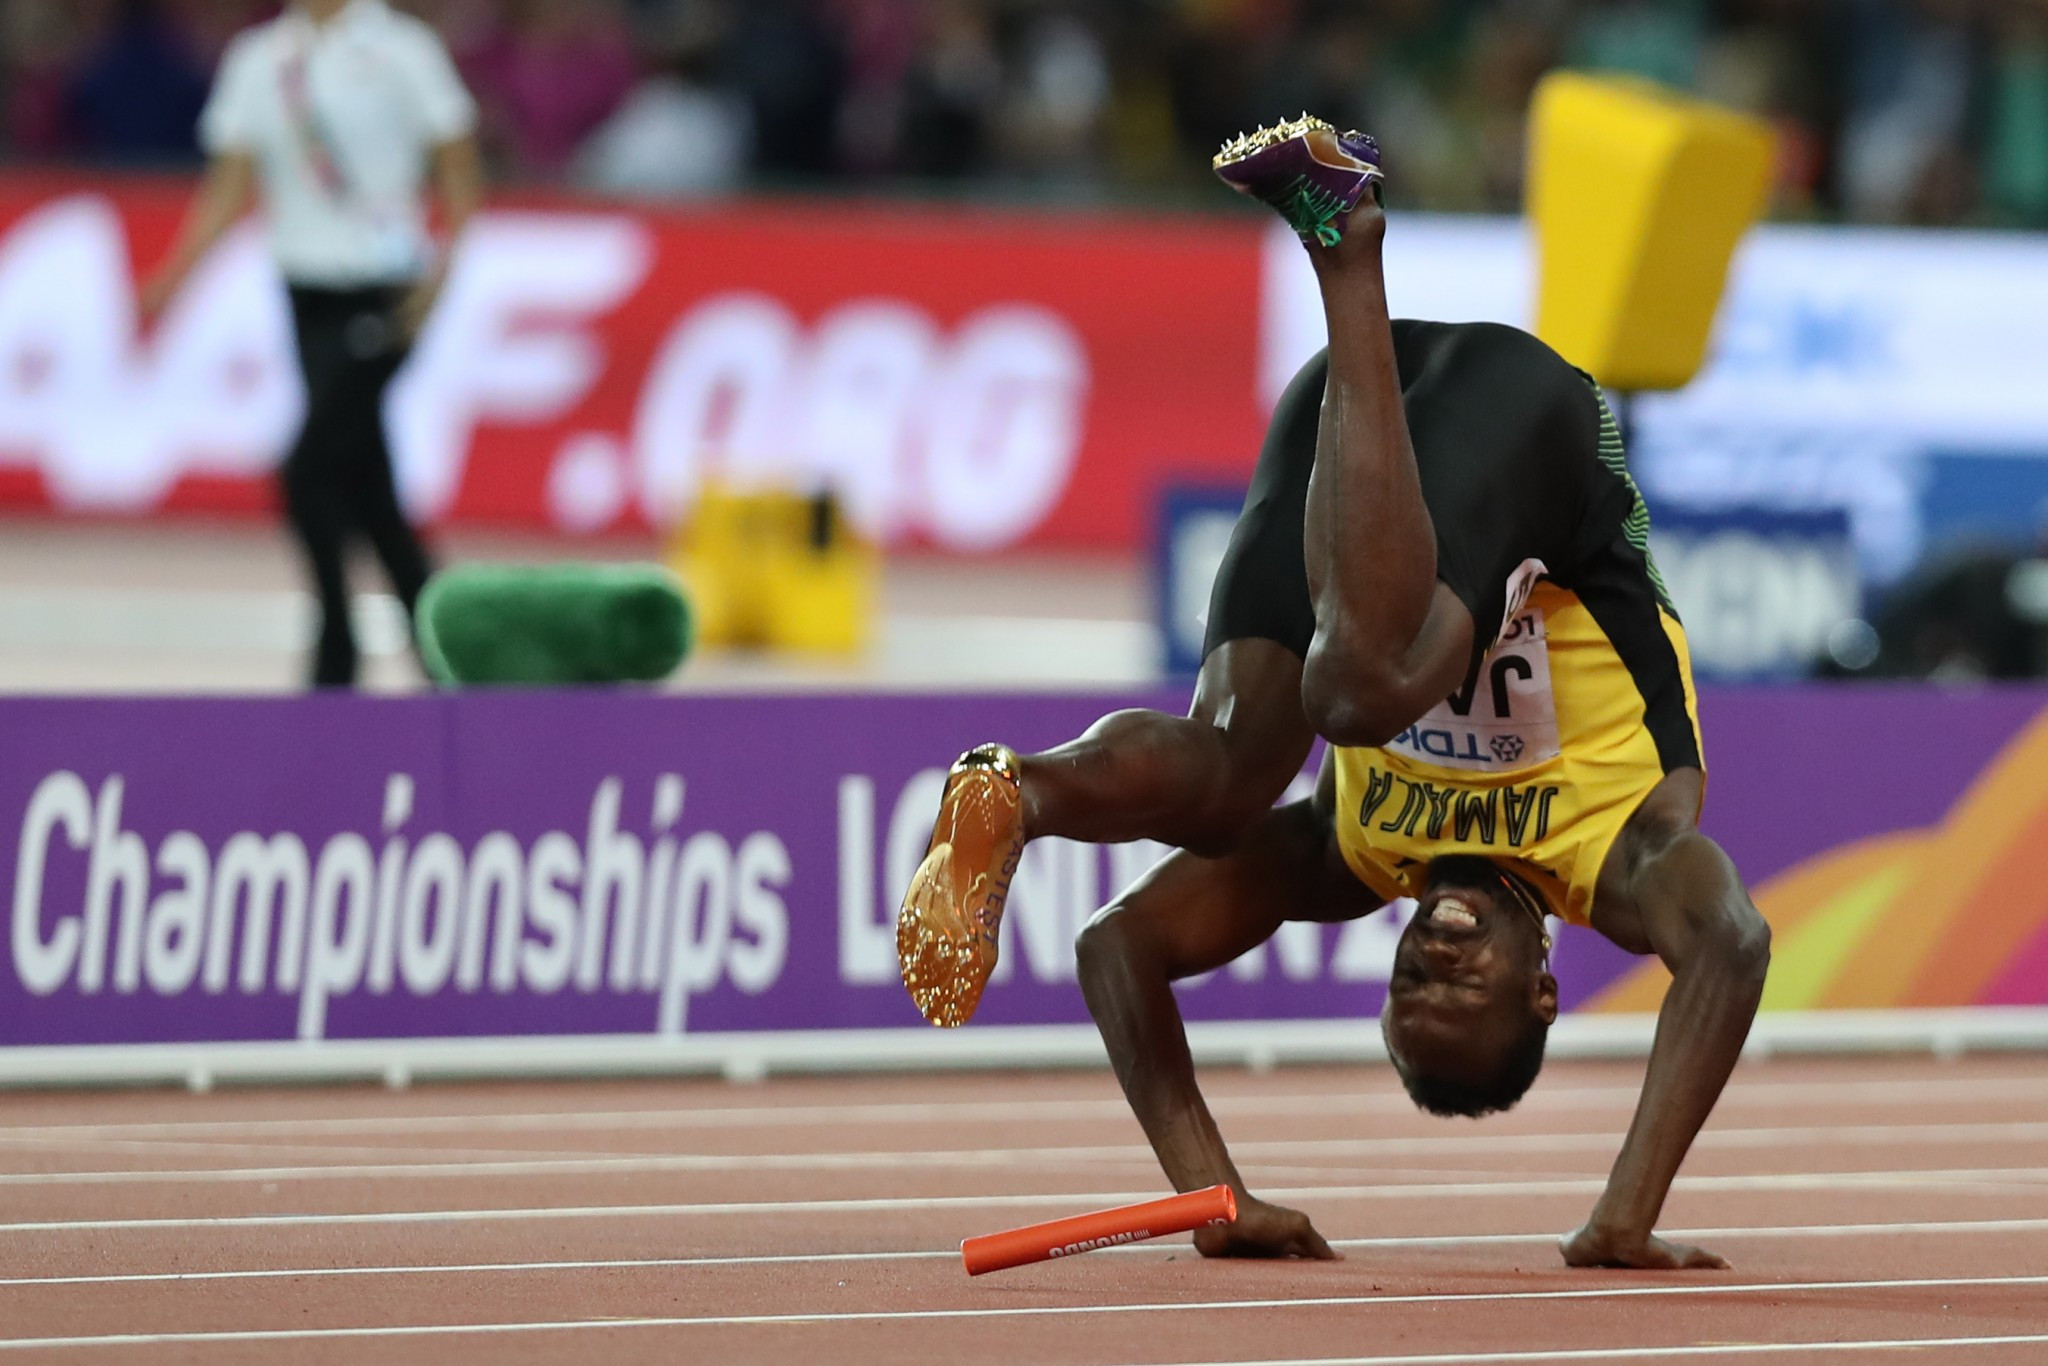 Usain Bolt's fall provided huge drama in the men's 4x100m relay race ©Getty Images